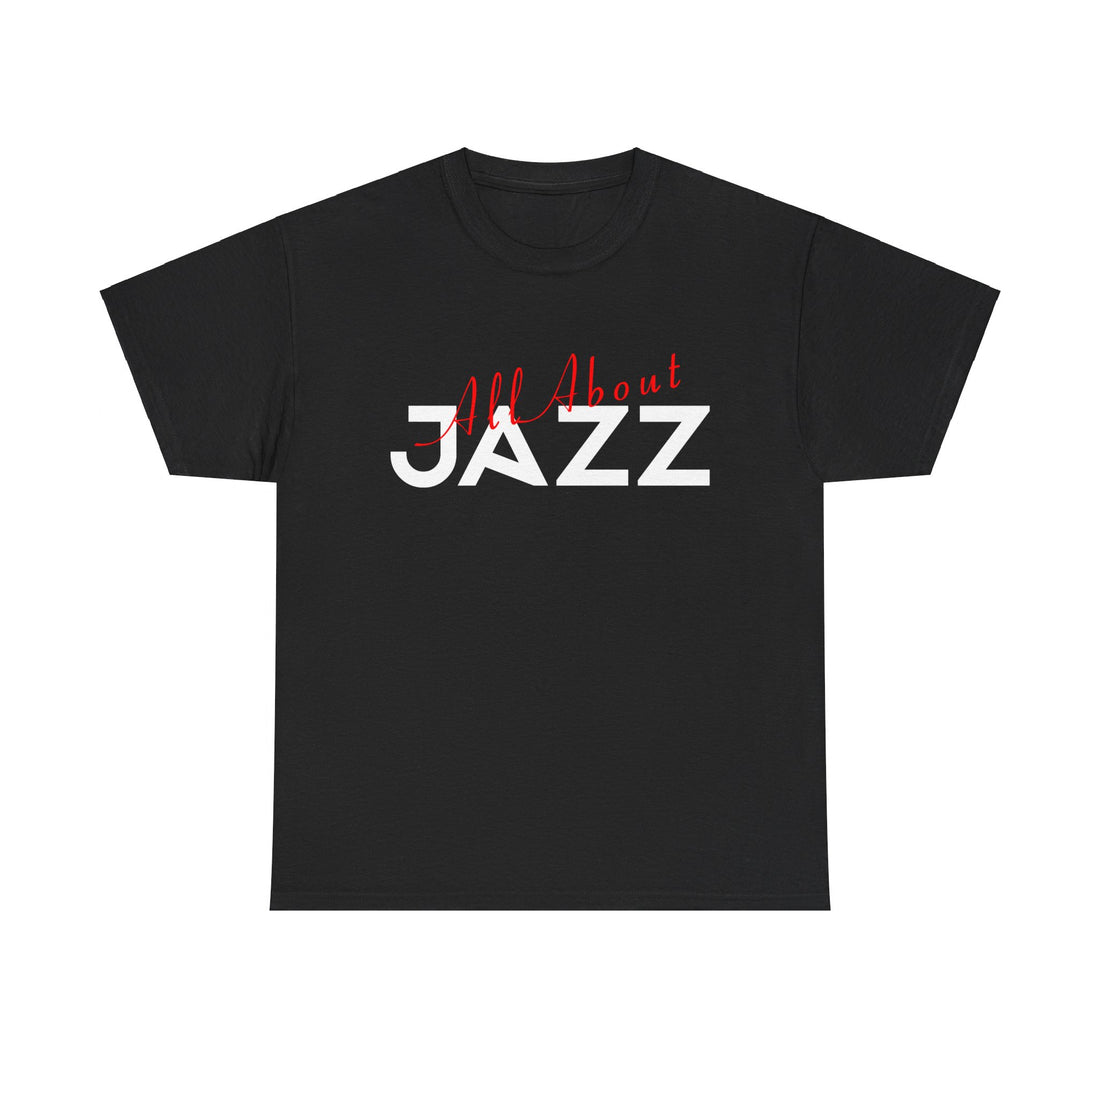 ‘All About Jazz’ black t shirt